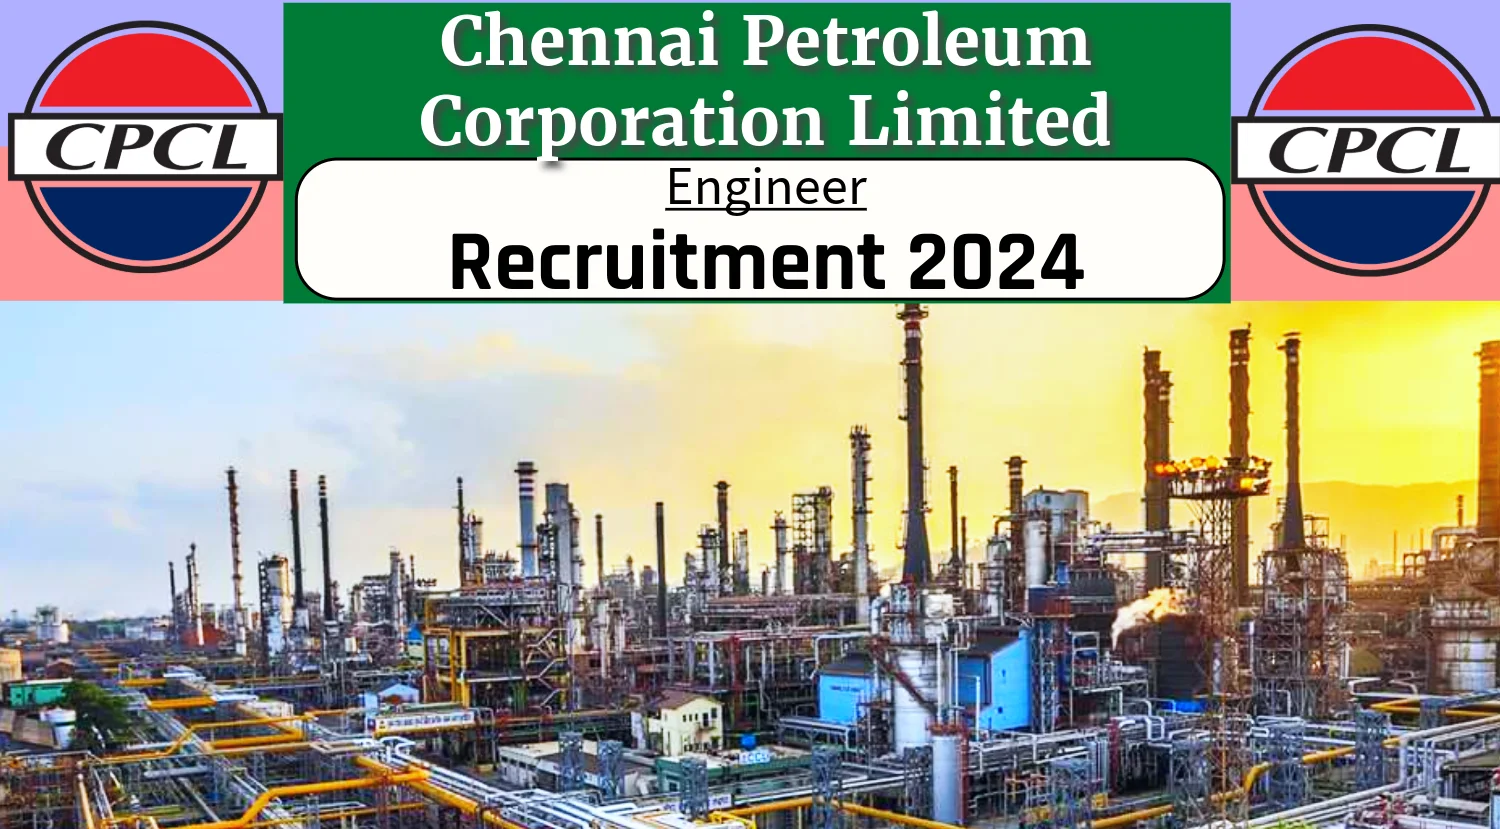 CPCL Engineer Recruitment 2024 Notification Out